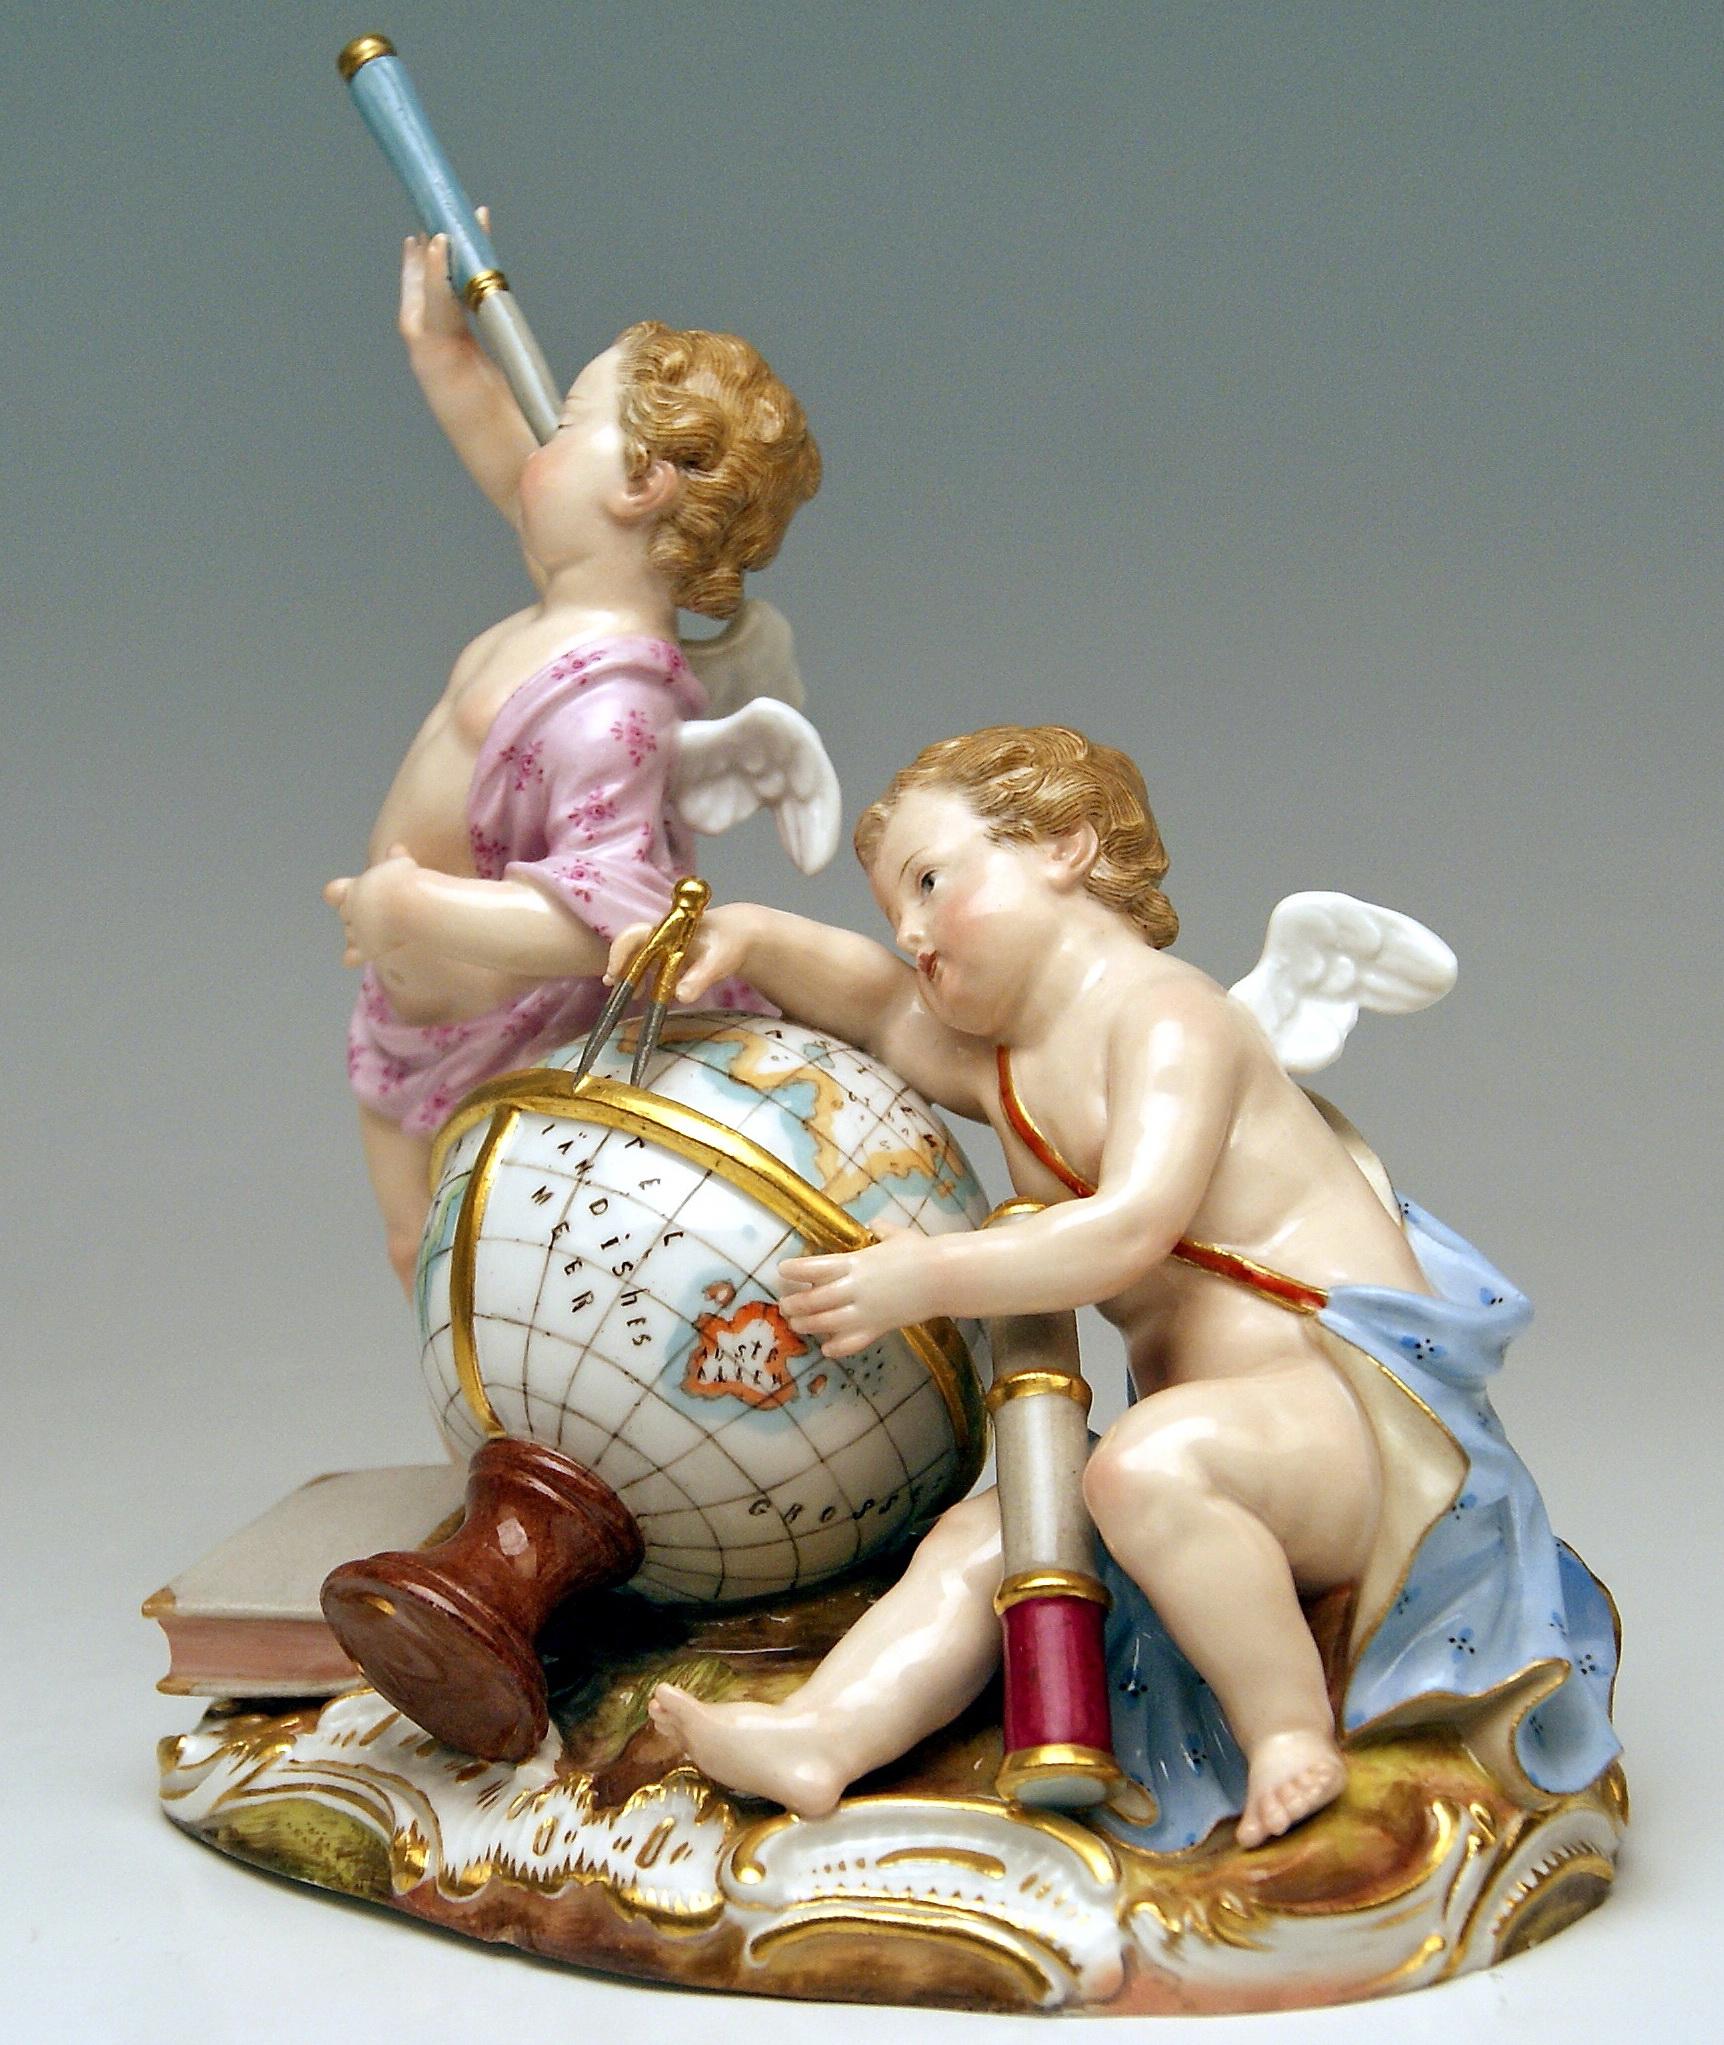 Meissen gorgeous cherubs figurines: Allegory of Astronomy
The details are stunningly scupltured = finest modelling

Manufactory: Meissen 
Dating: made circa 1870
Hallmarked: Meissen Mark with Pommels on Hilts (19th century)
First